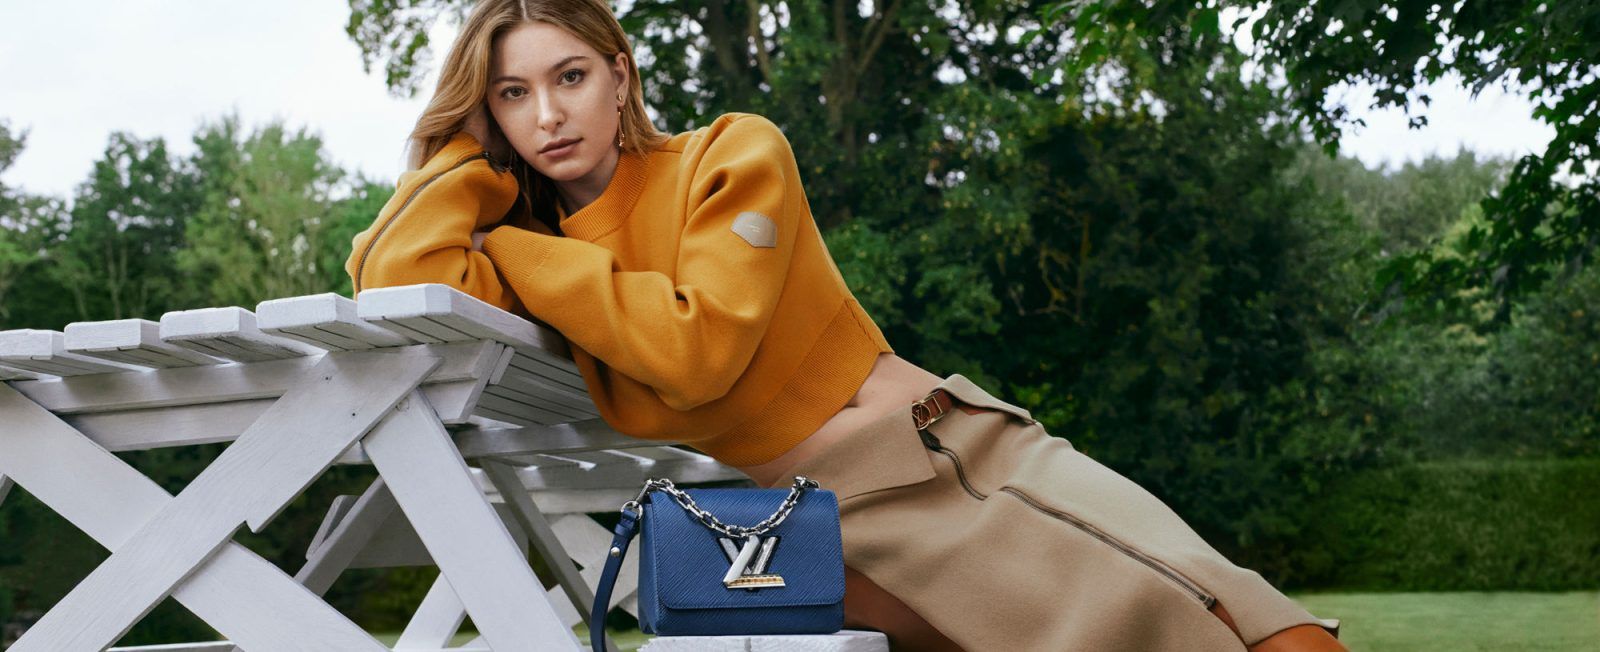 The hottest 2021 summer collections (Gucci, Louis Vuitton, and more)